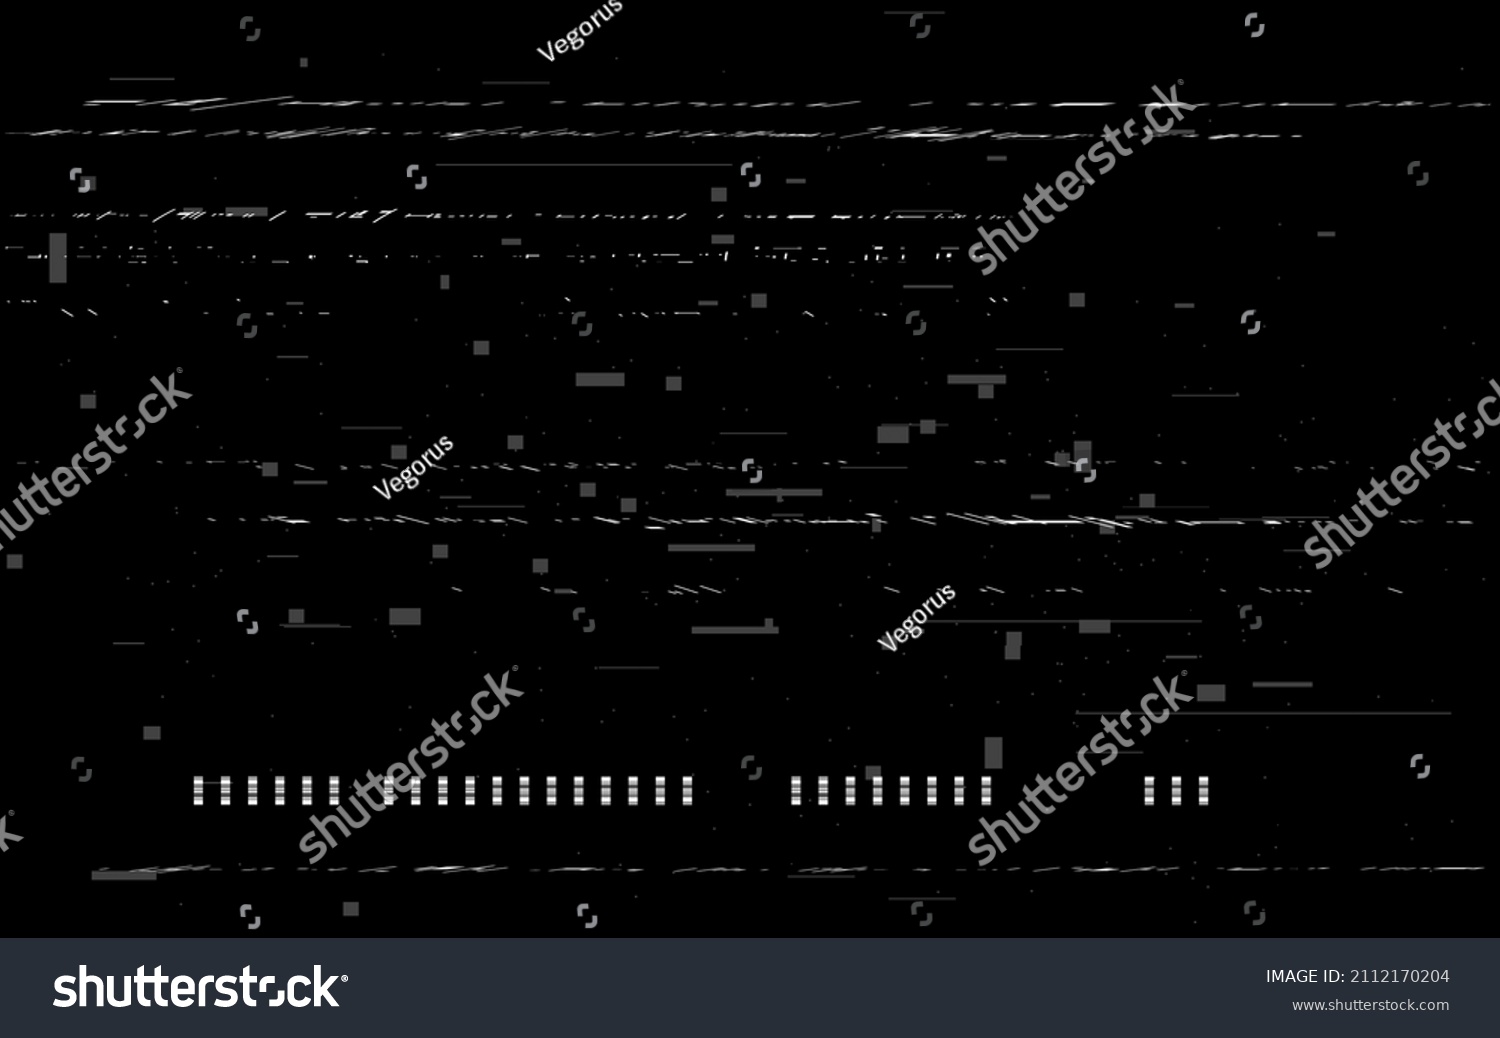 Glitch Retro Distortions Old Vhs Effect Stock Vector (Royalty Free ...